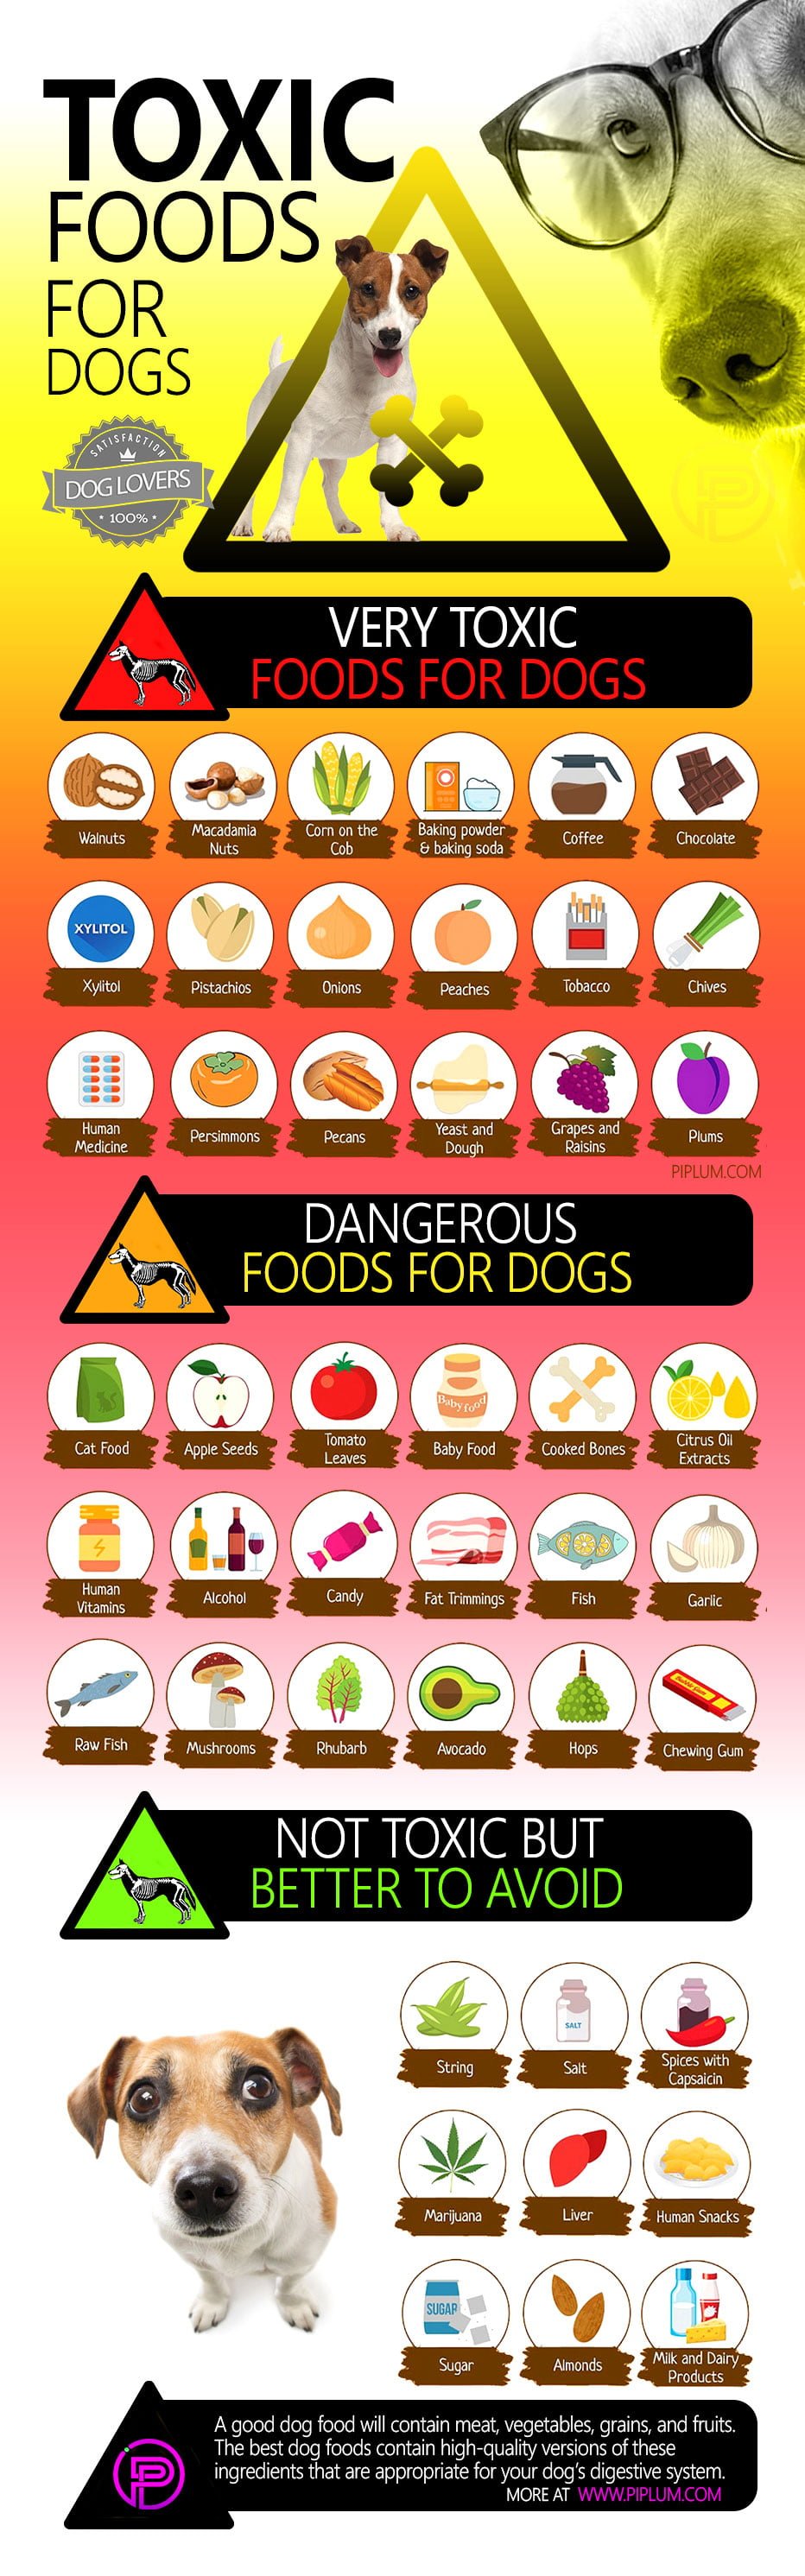 the best human food for dogs